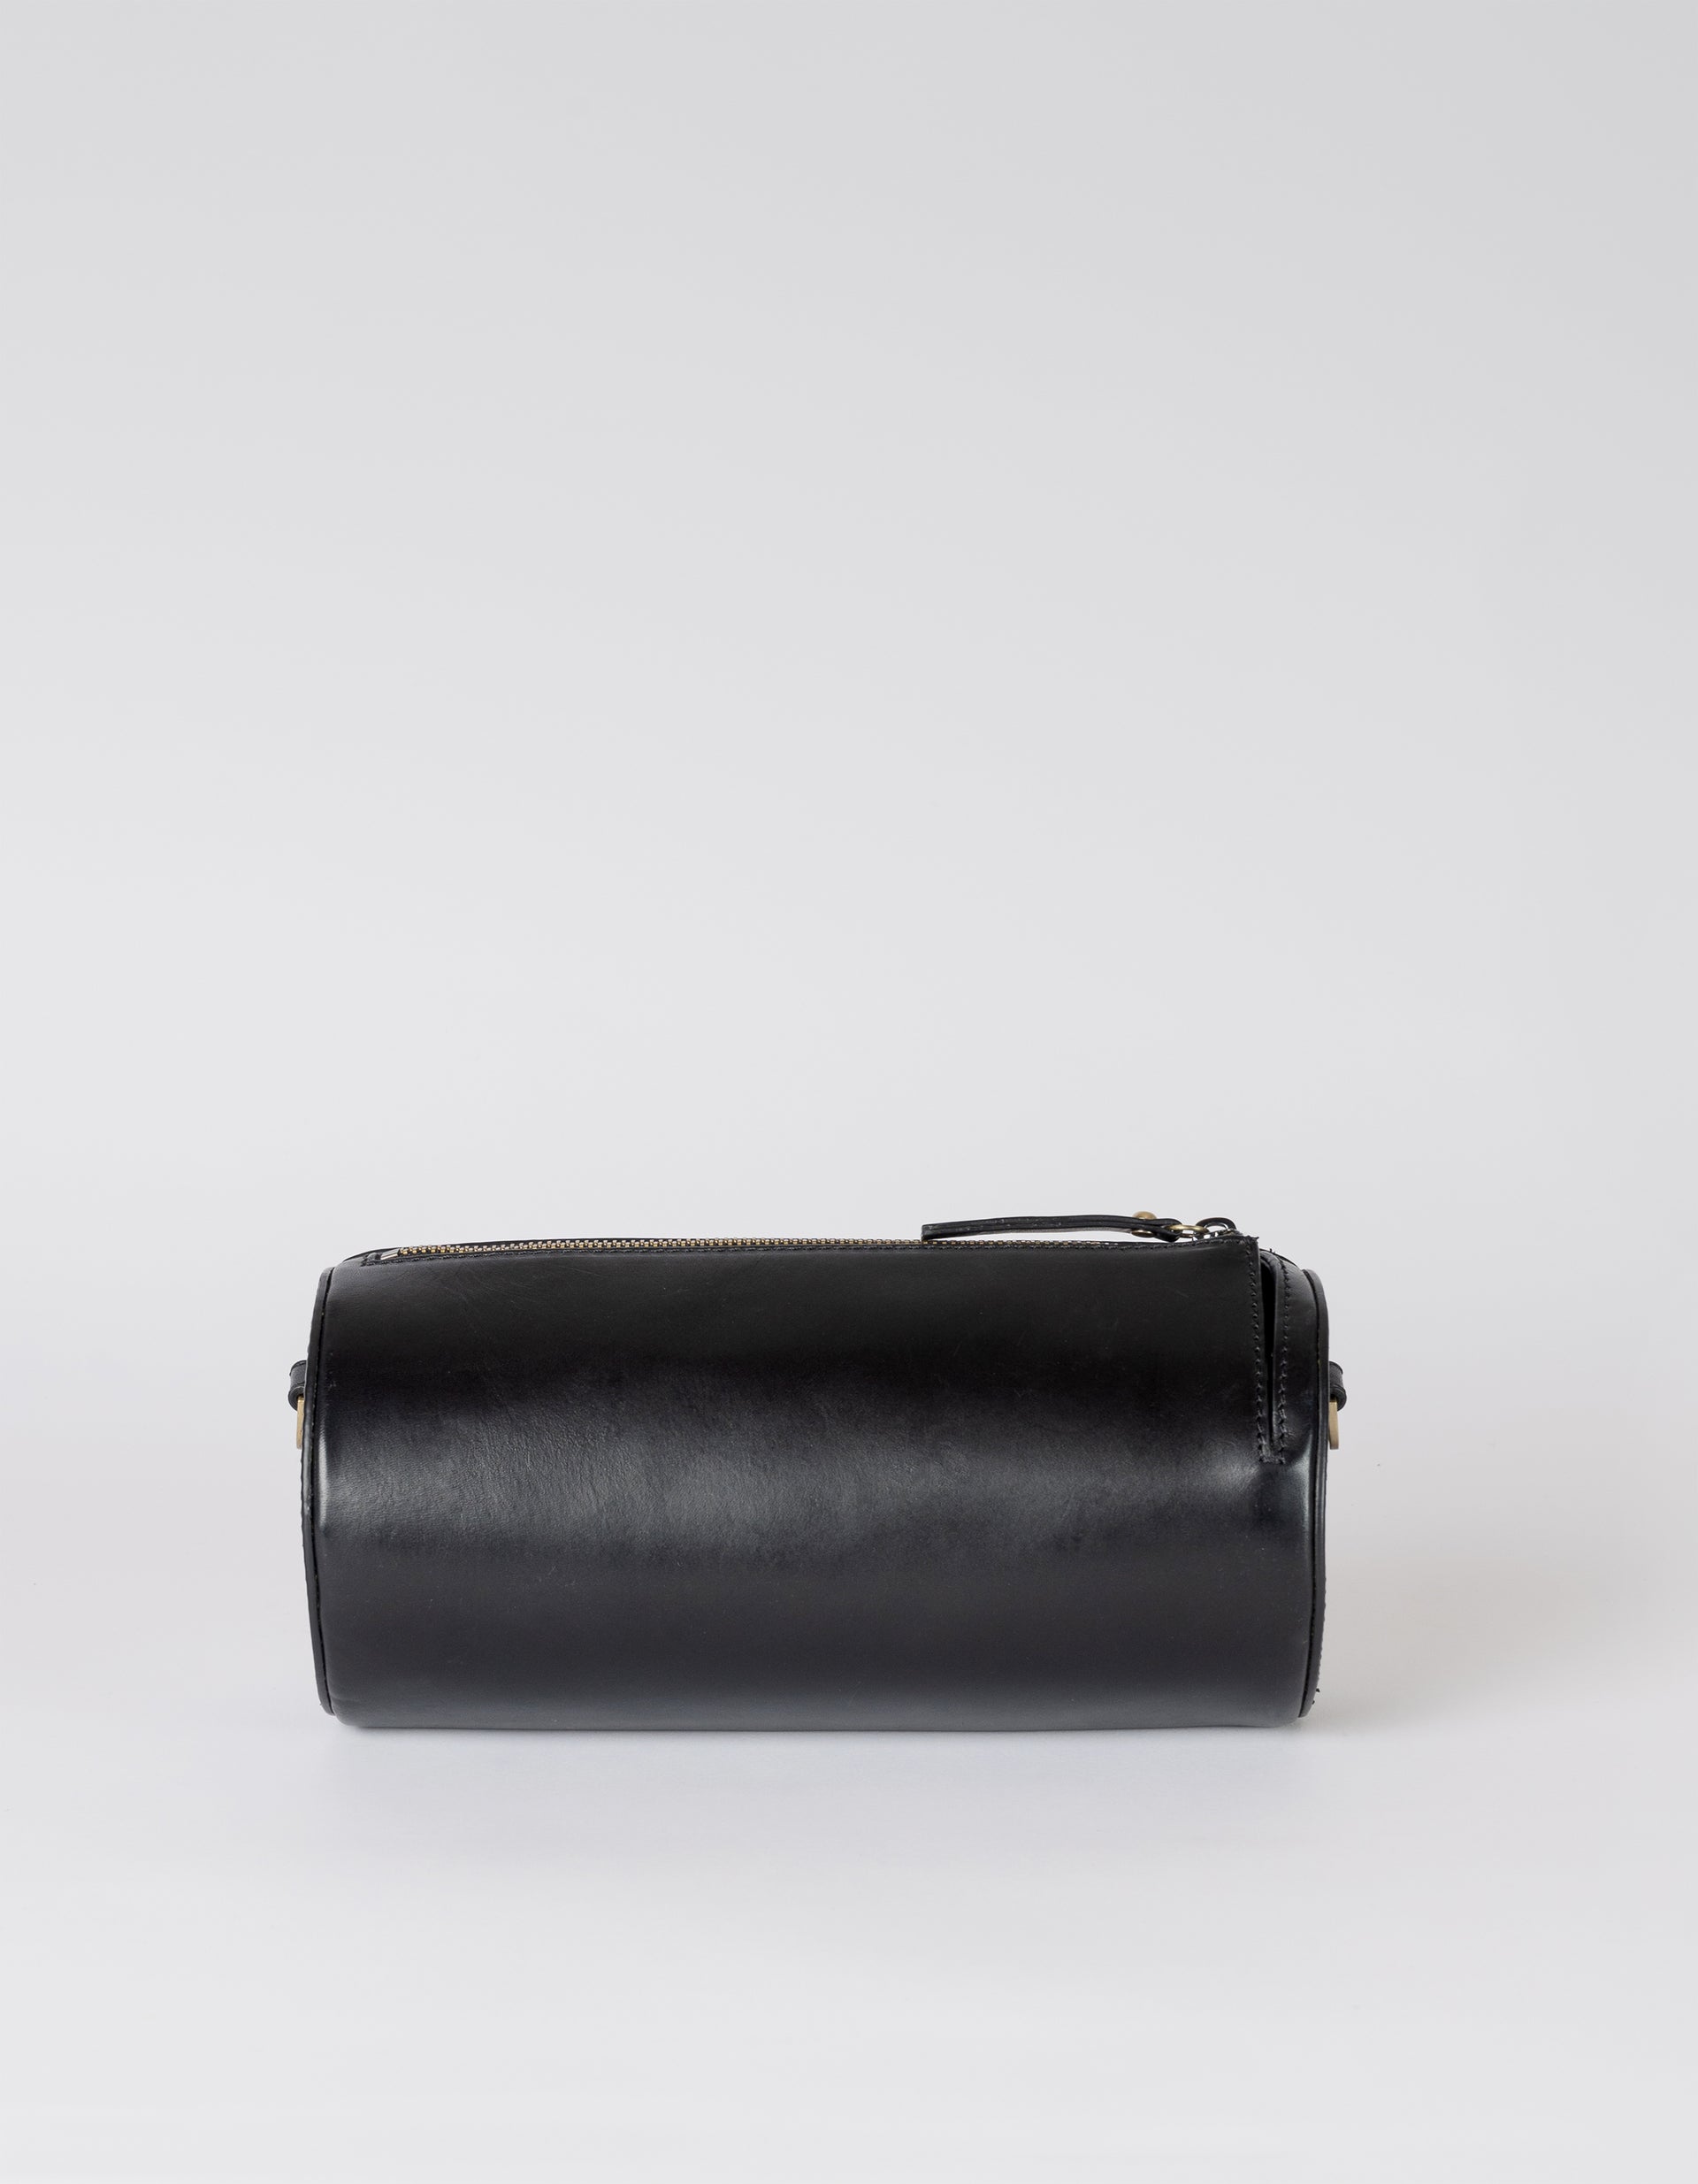 Izzy bag in black classic leather, back image